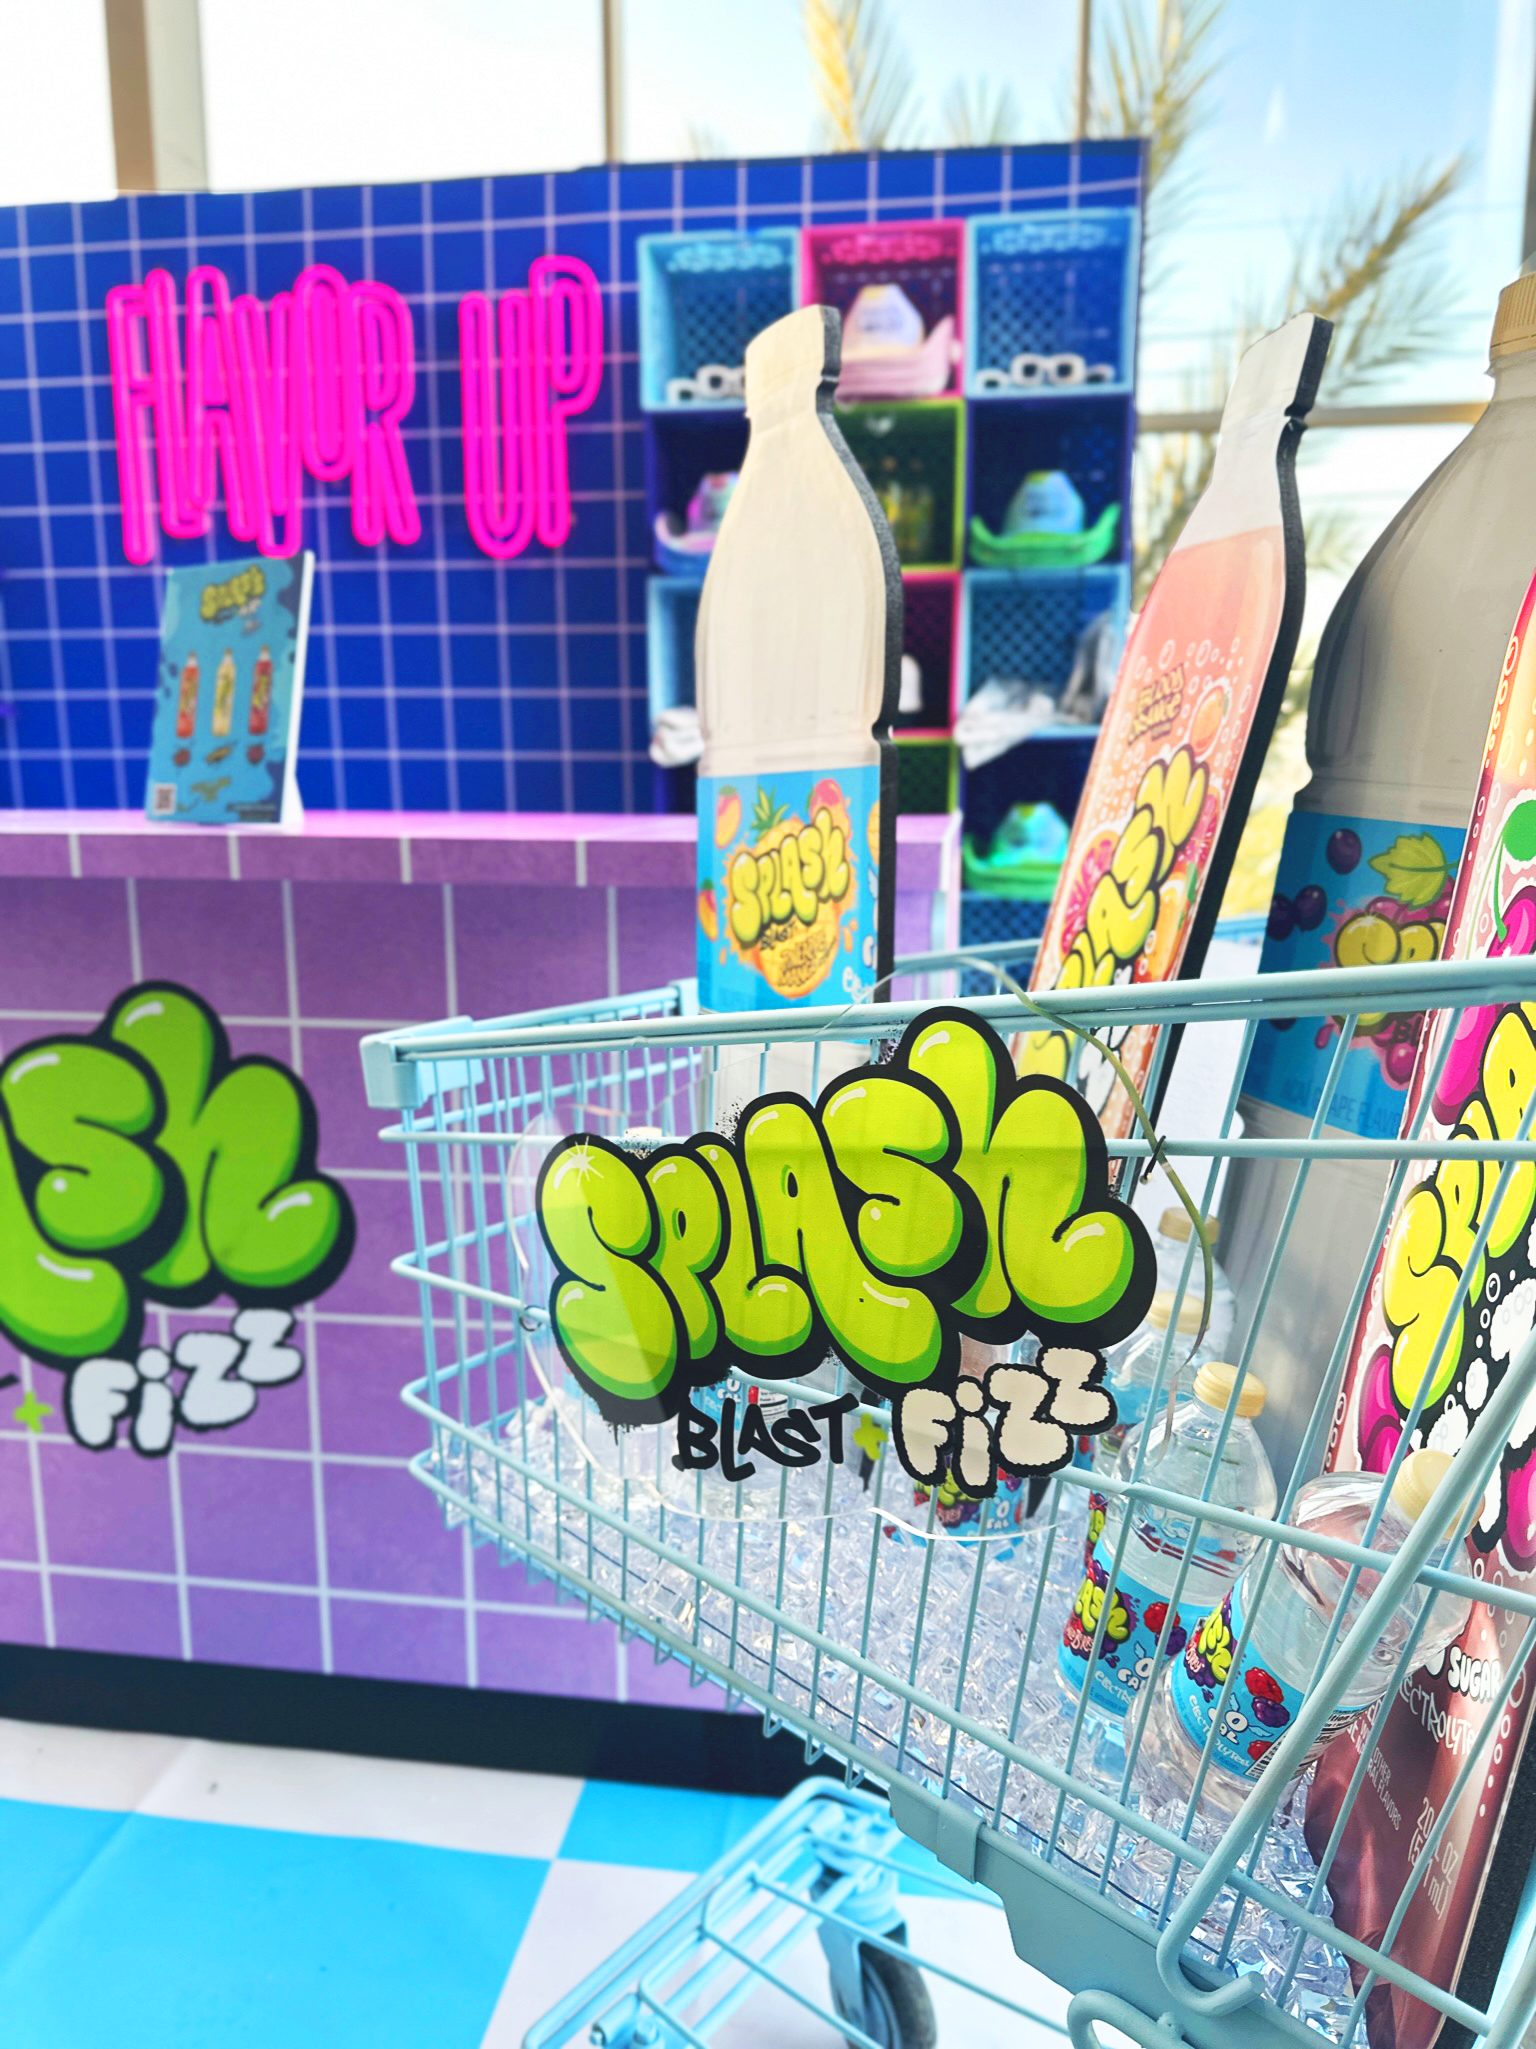 A grocery cart filled with giant cutouts of Splash Blast and Splash Fizz in front of the Funky Bodega.